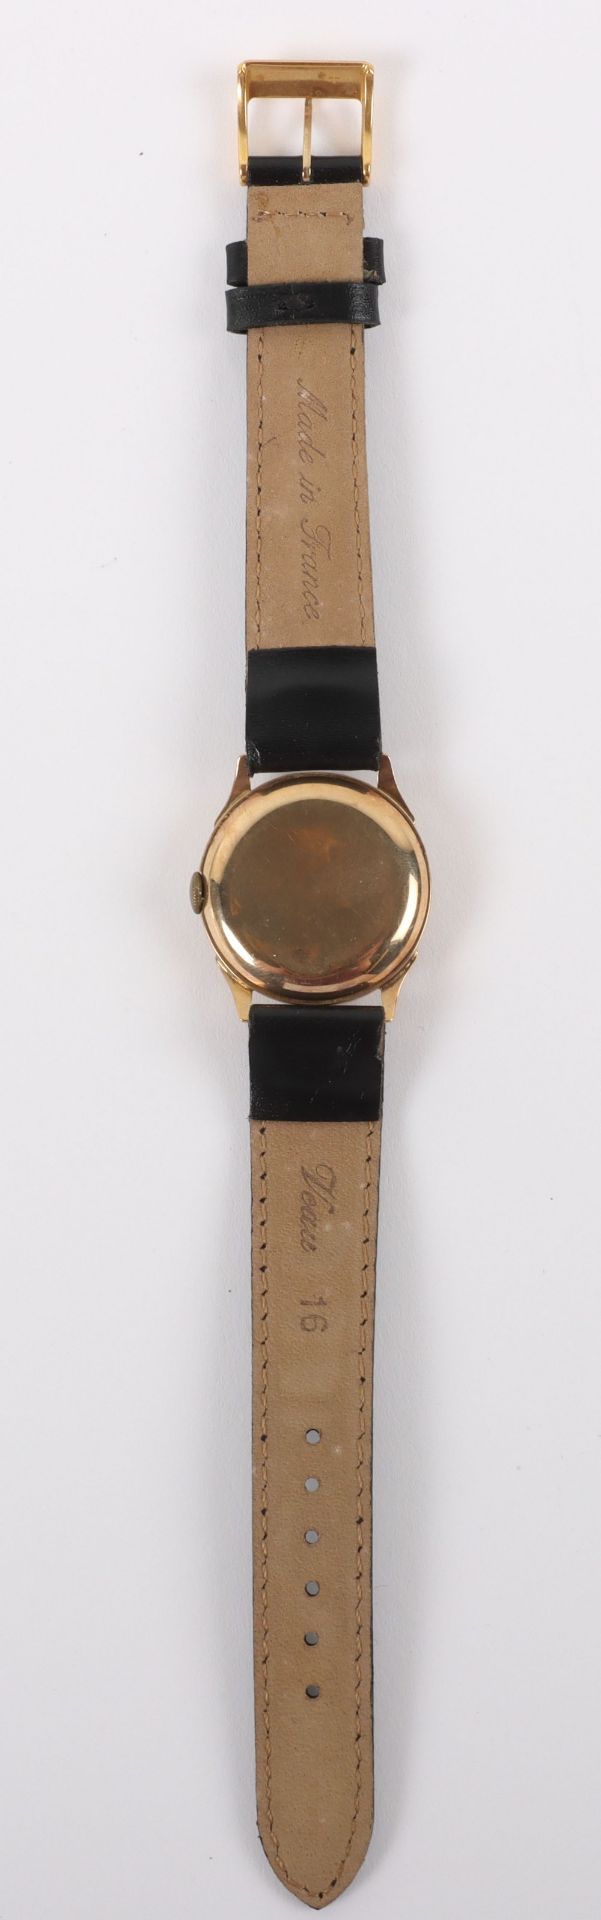 A vintage 9ct gold Swiss made wristwatch, circa 1940 - Image 4 of 7